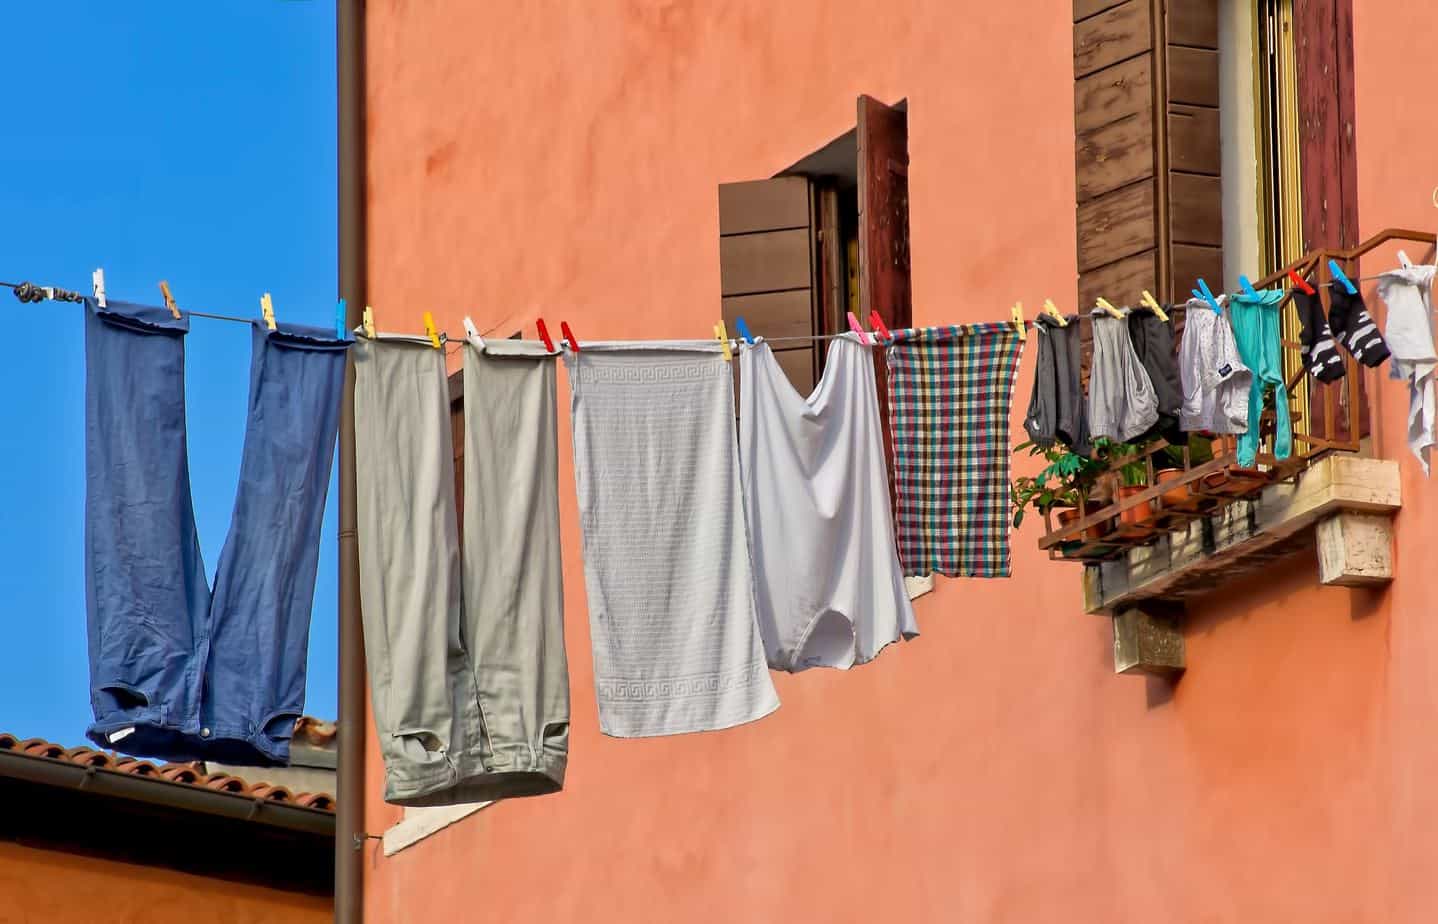 Clothes hanging on outdoor clothes line